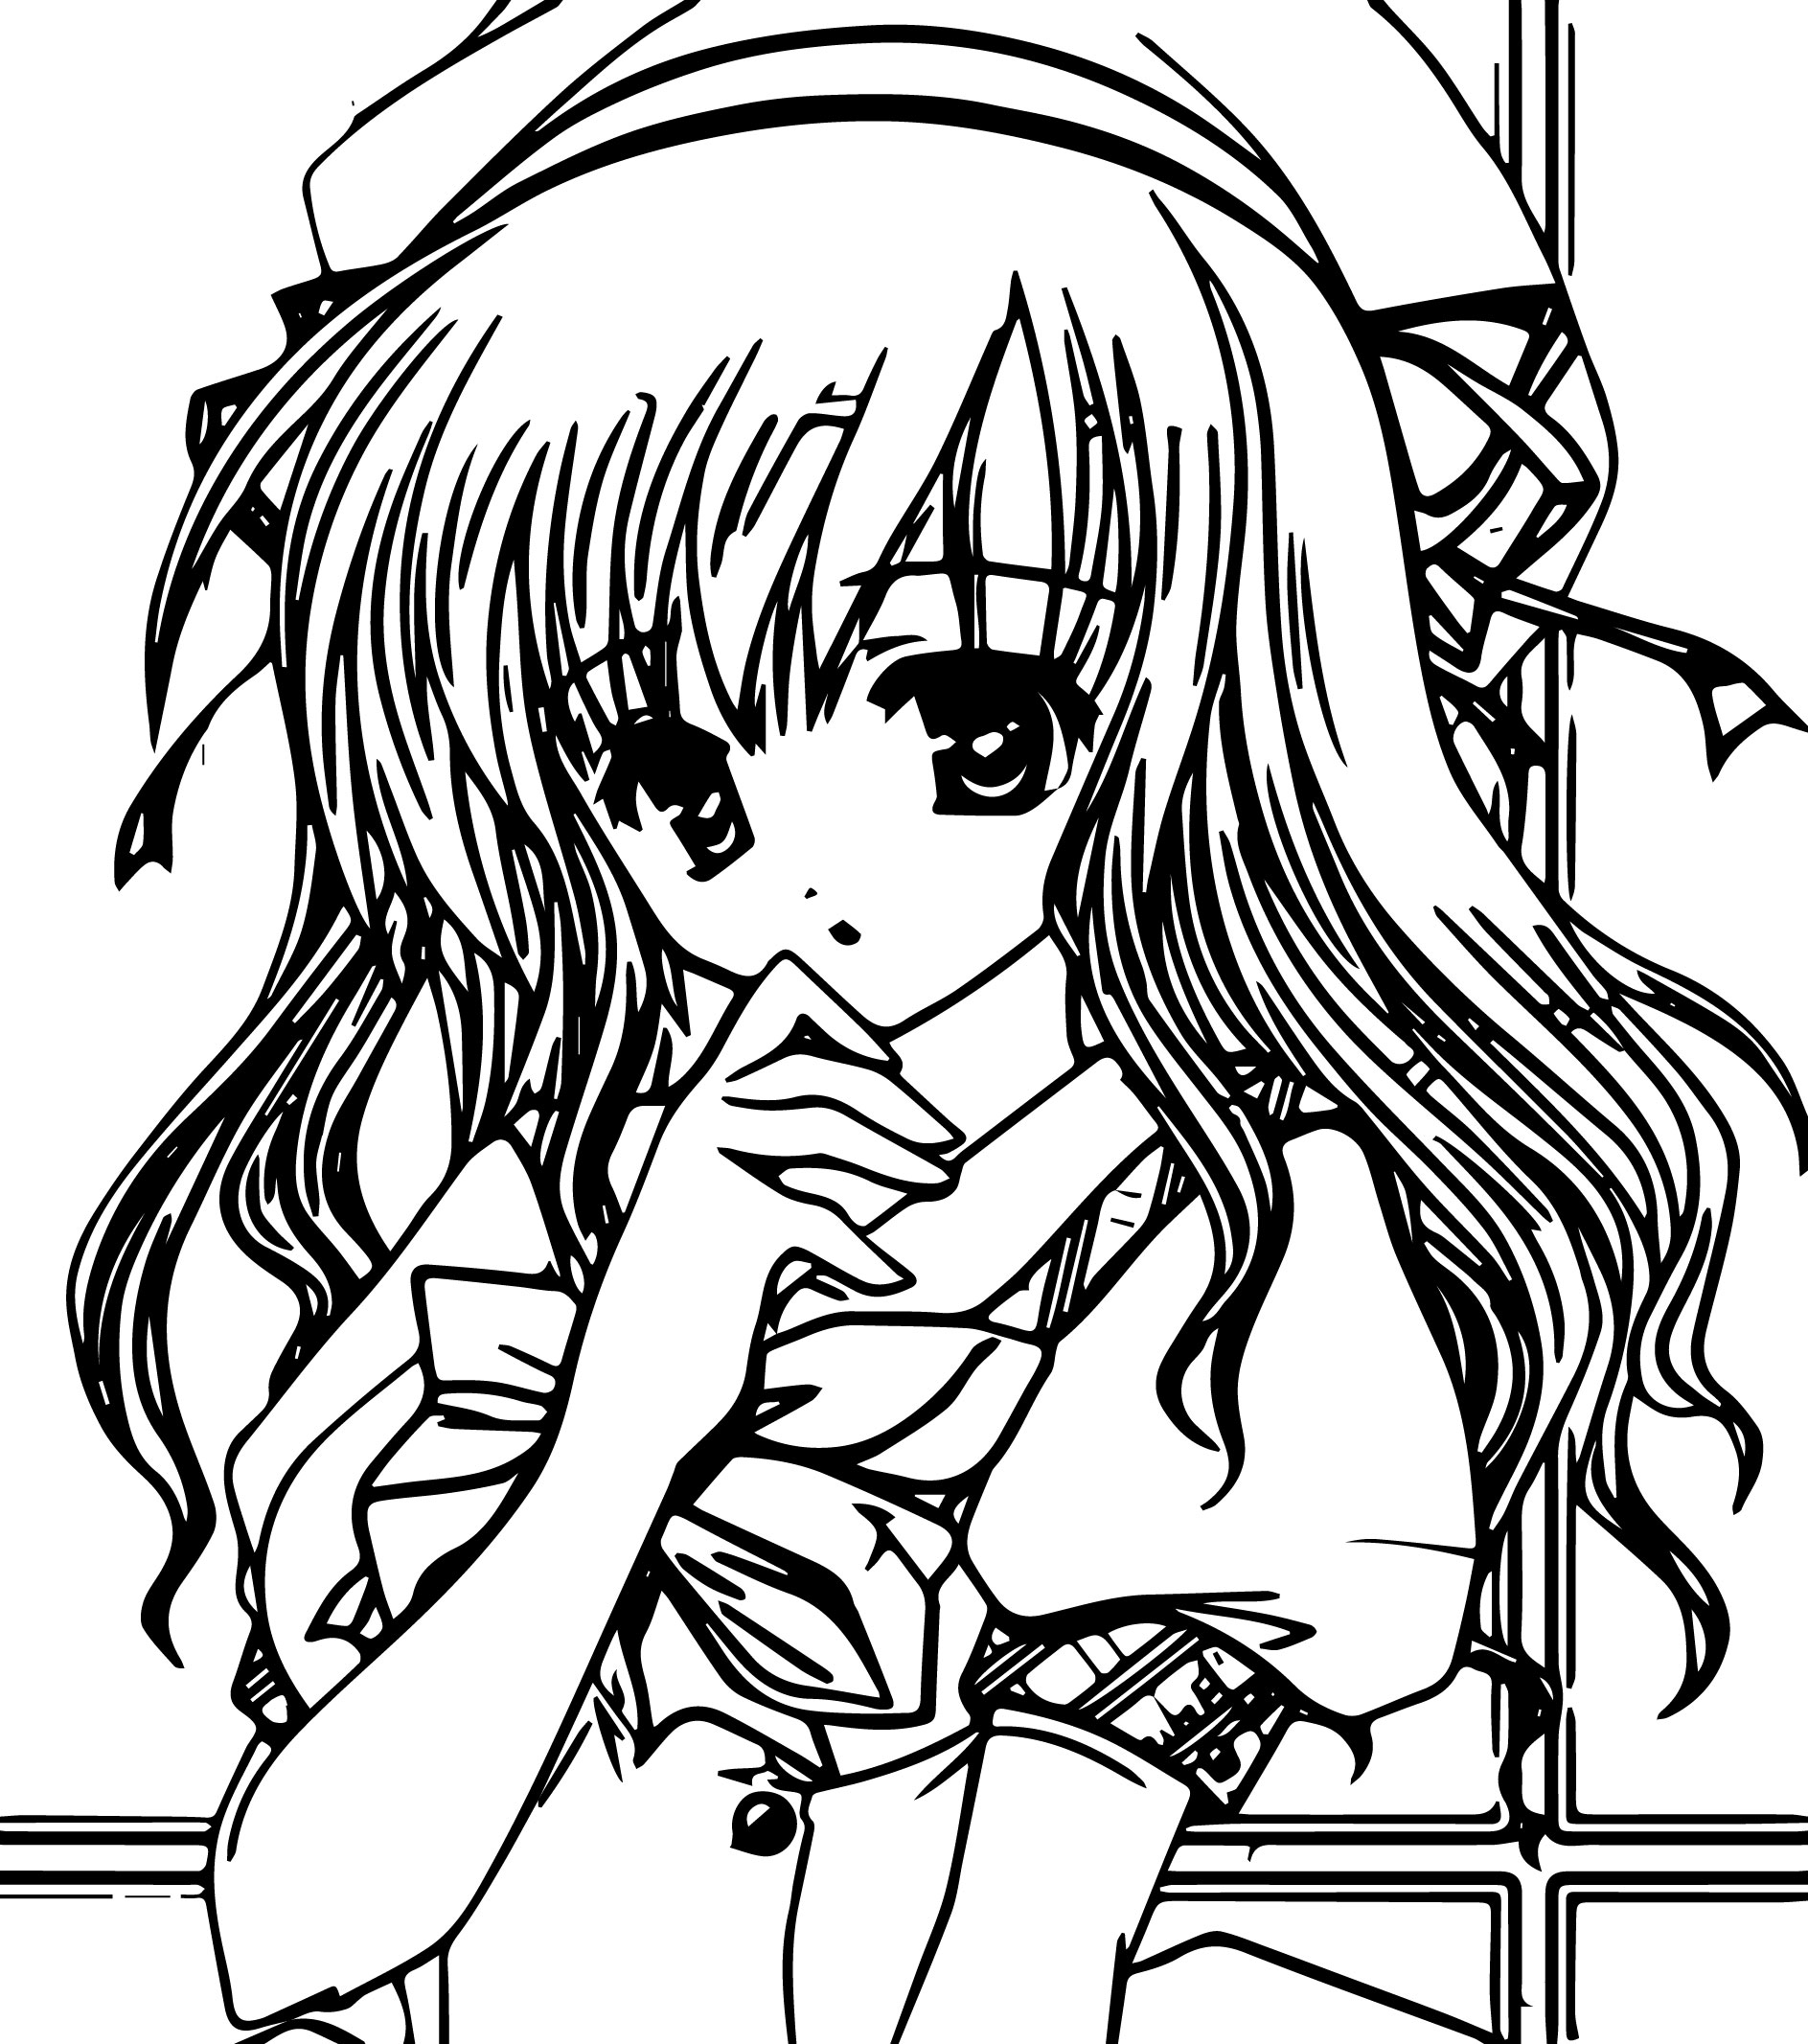 Anime Girl Very Very Cute Coloring Page | Wecoloringpage.com